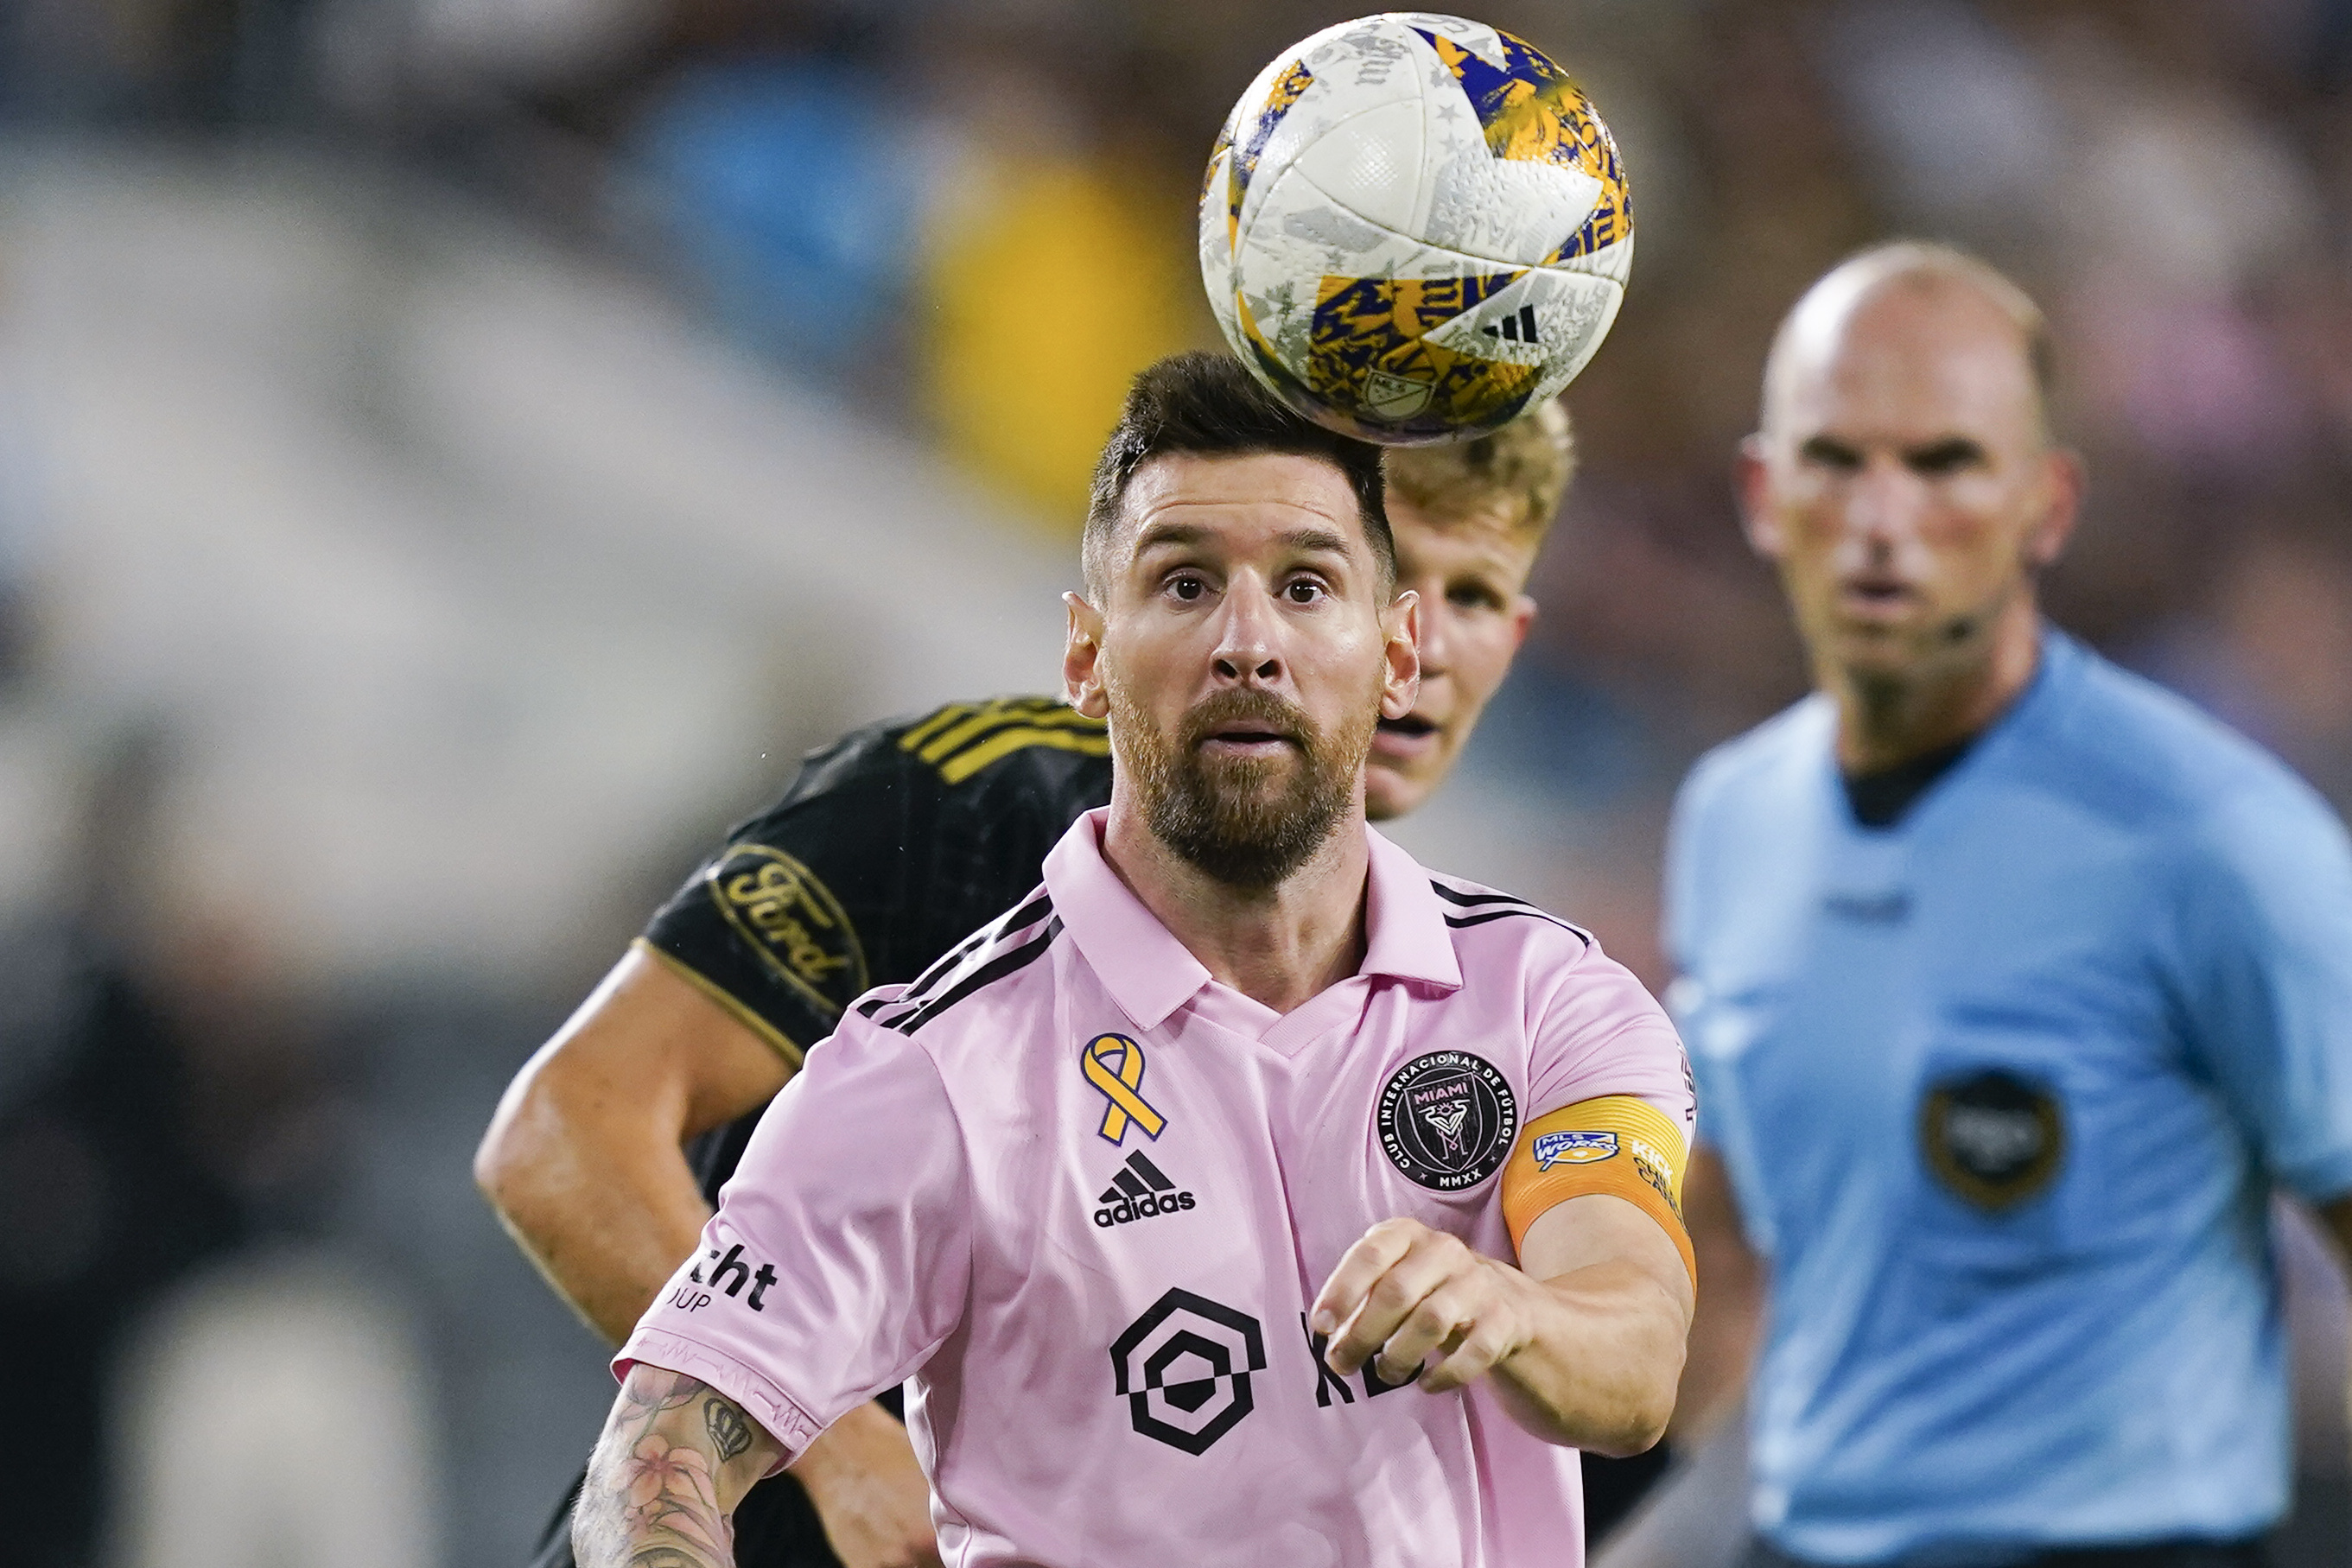 Columbus Crew roster news, moves, signings, and analysis - Four